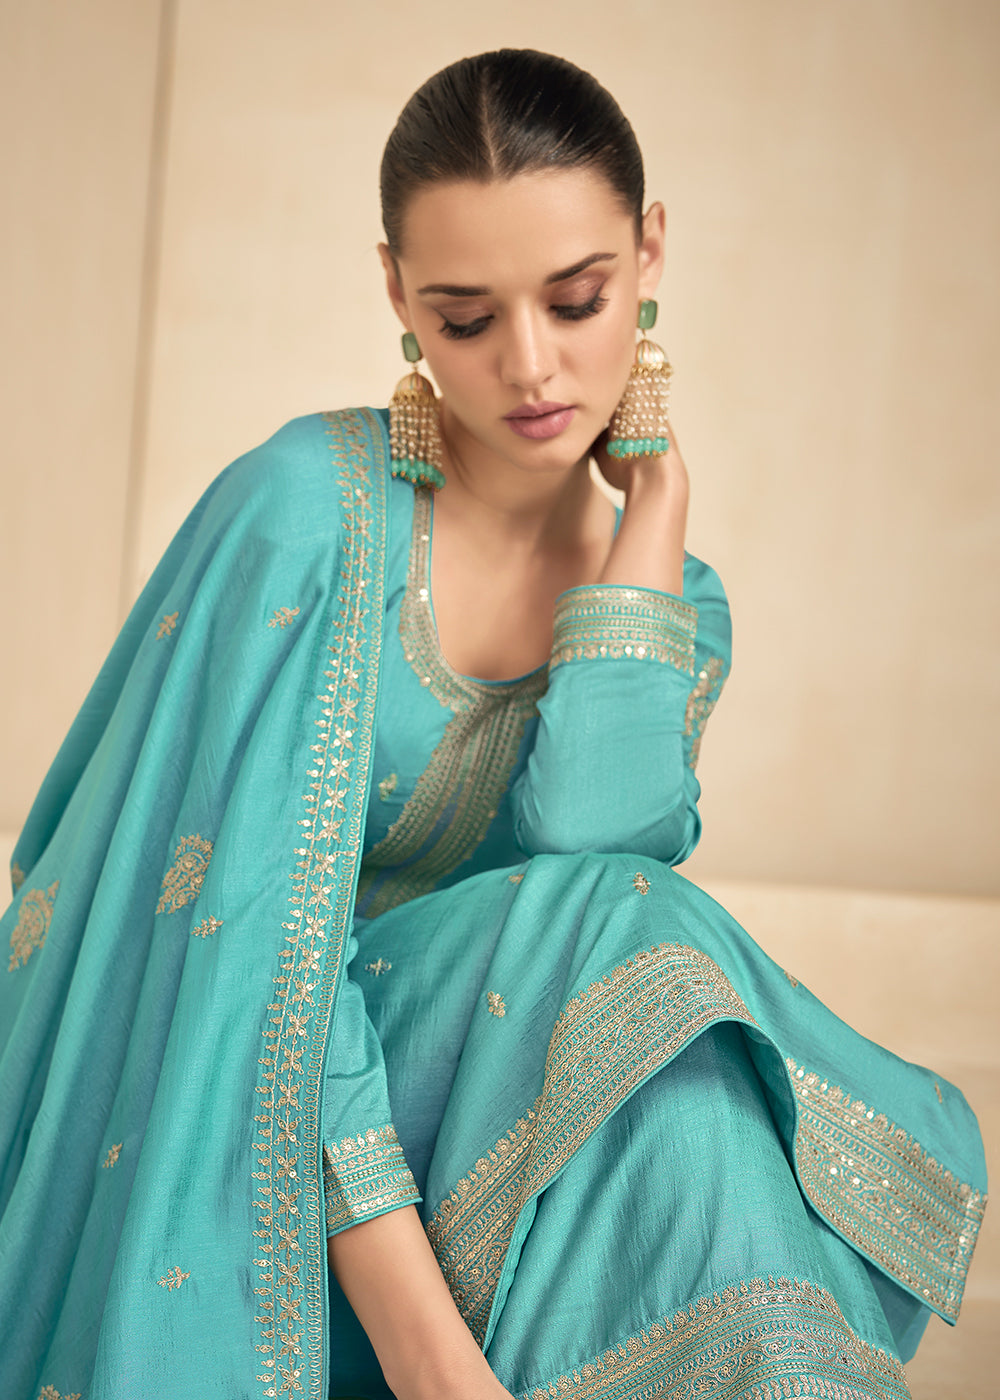 Buy Now Premium Silk Pretty Blue Embroidered Straight Palazzo Salwar Suit Online in USA, UK, Canada, Germany, Australia & Worldwide at Empress Clothing.